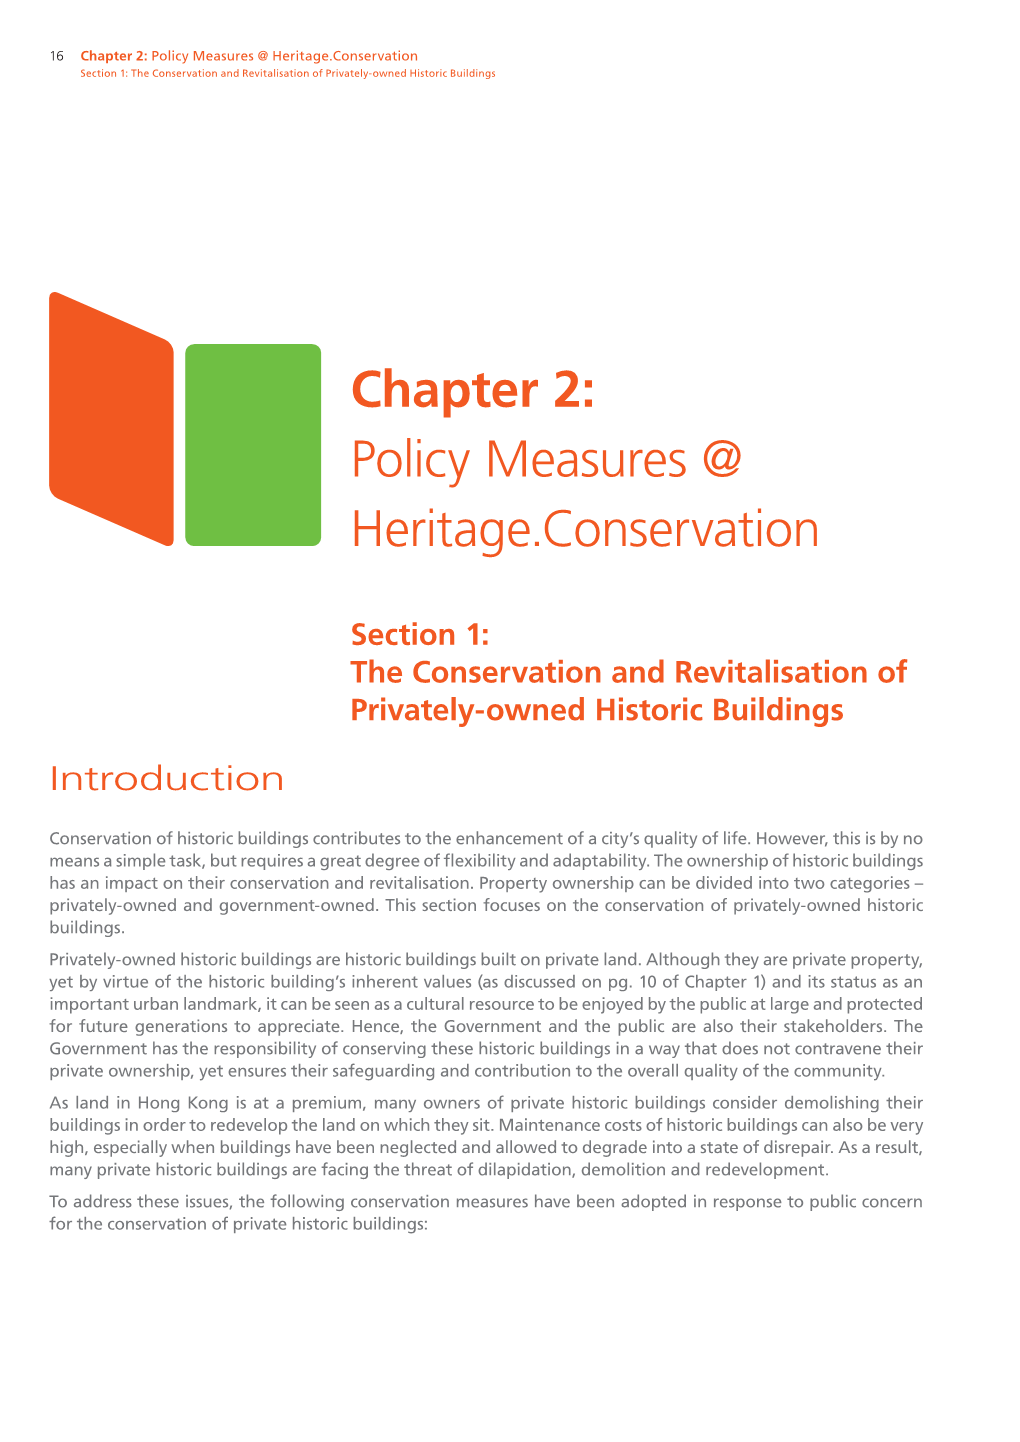 The Conservation and Revitalisation of Privately-Owned Historic Buildings